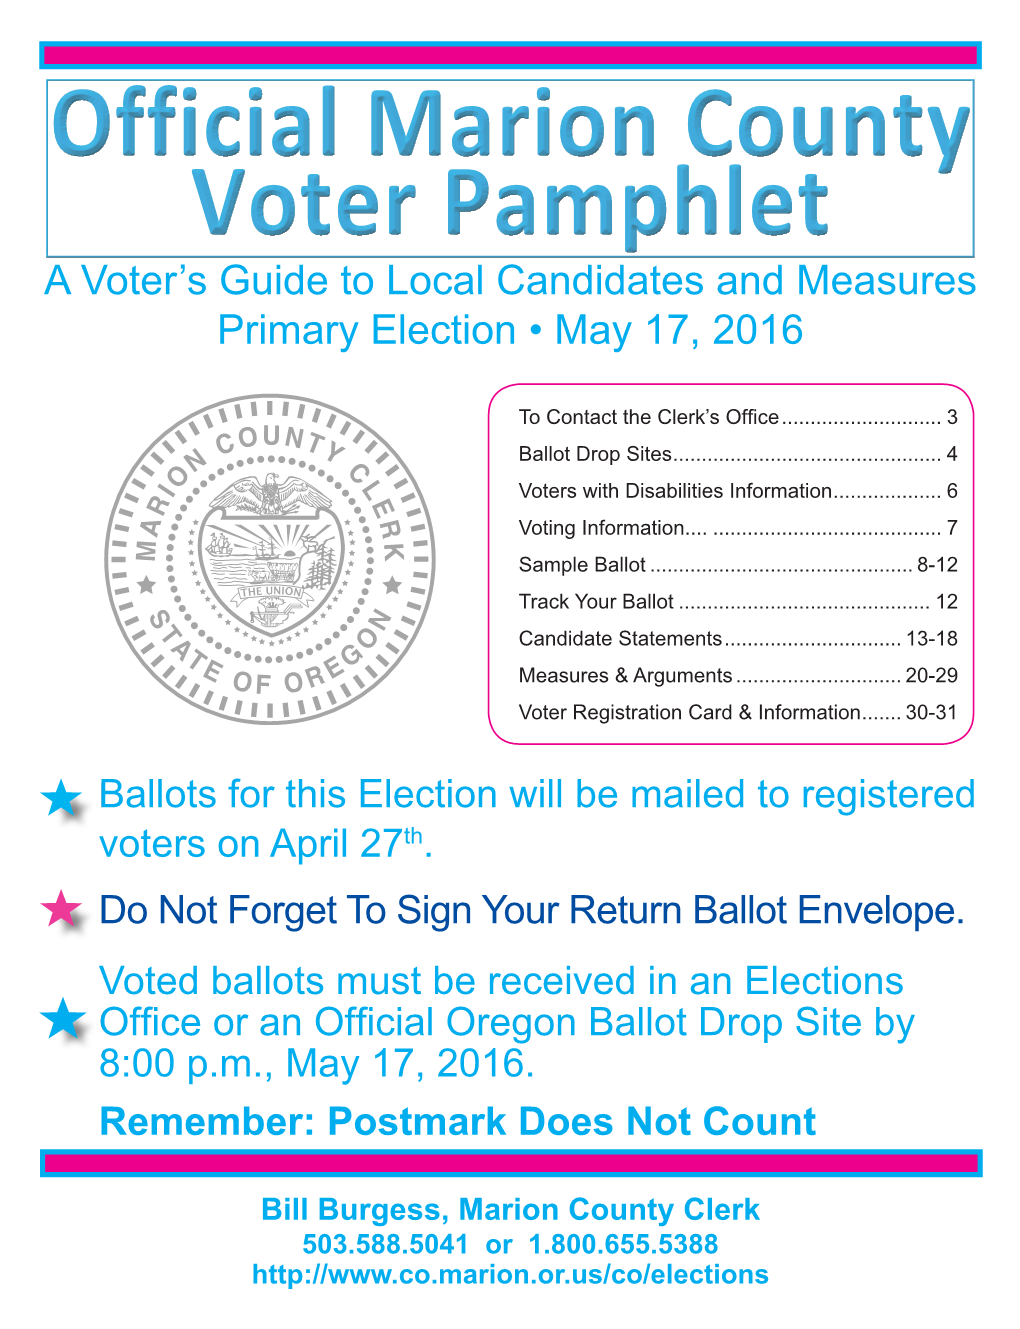 May 17, 2016 Primary Election